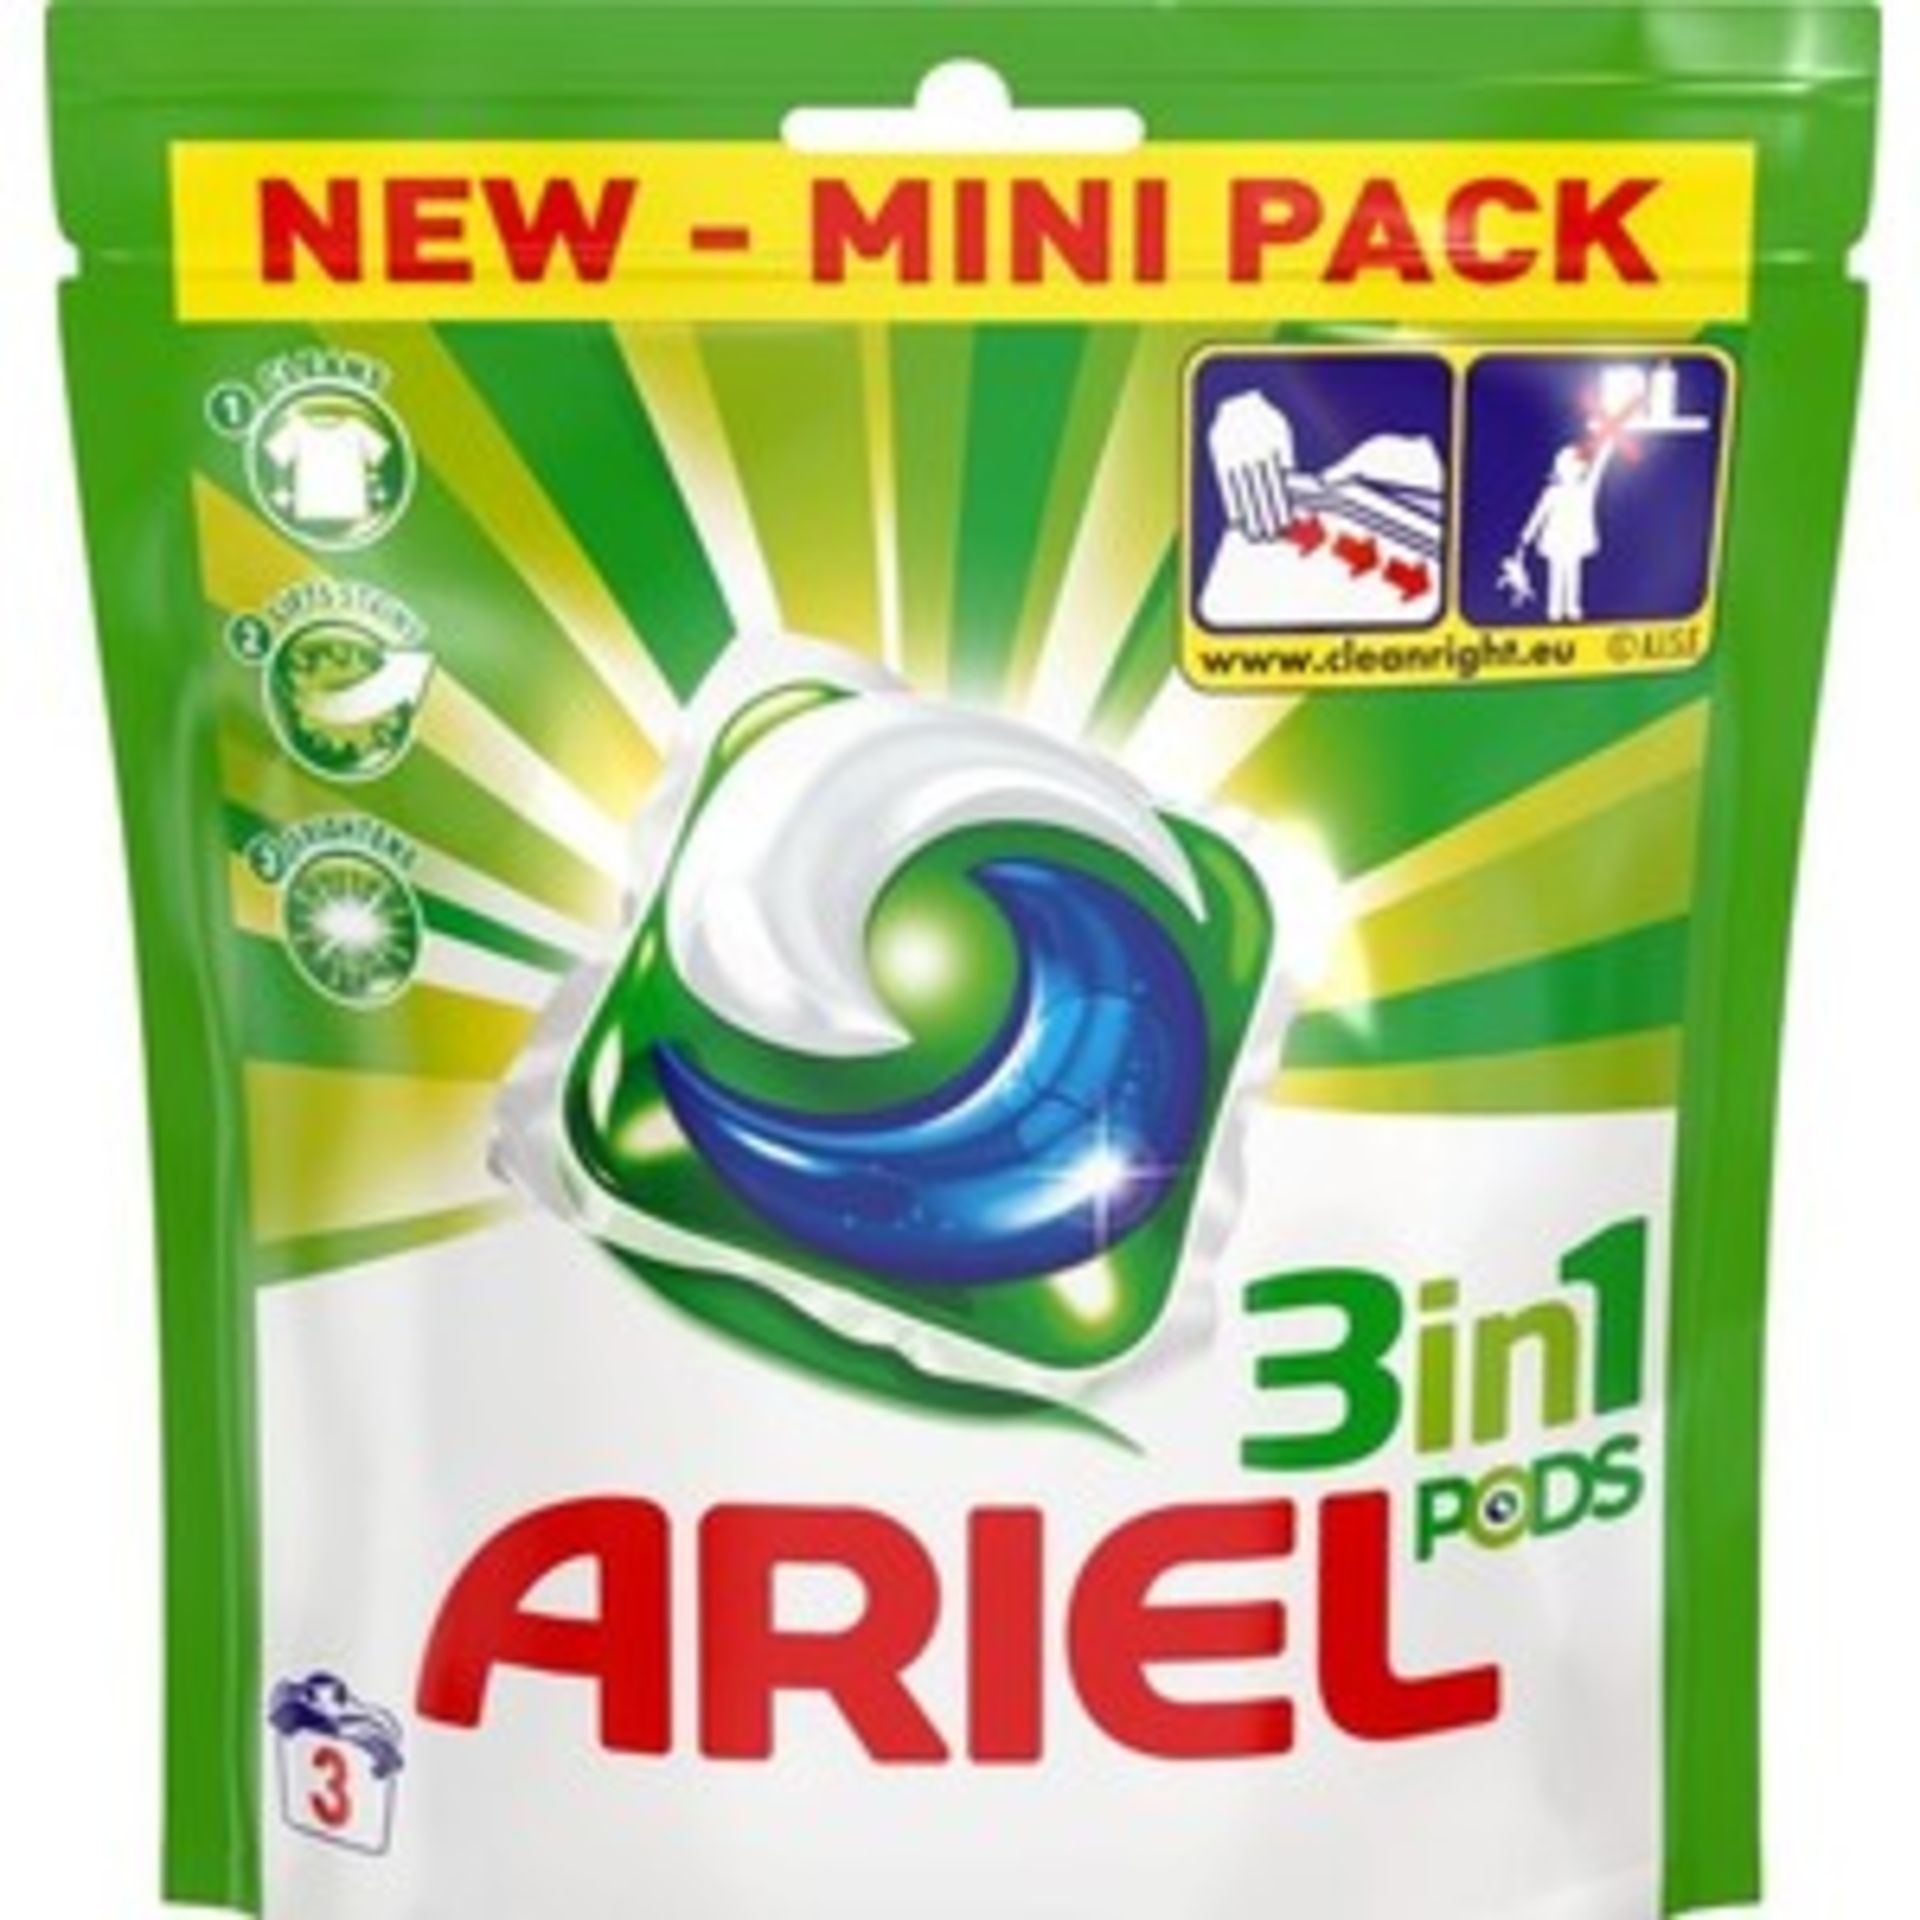 V *TRADE QTY* Brand New 12 Ariel 3-in-1 Pods Laundry Detergent X 5 YOUR BID PRICE TO BE MULTIPLIED